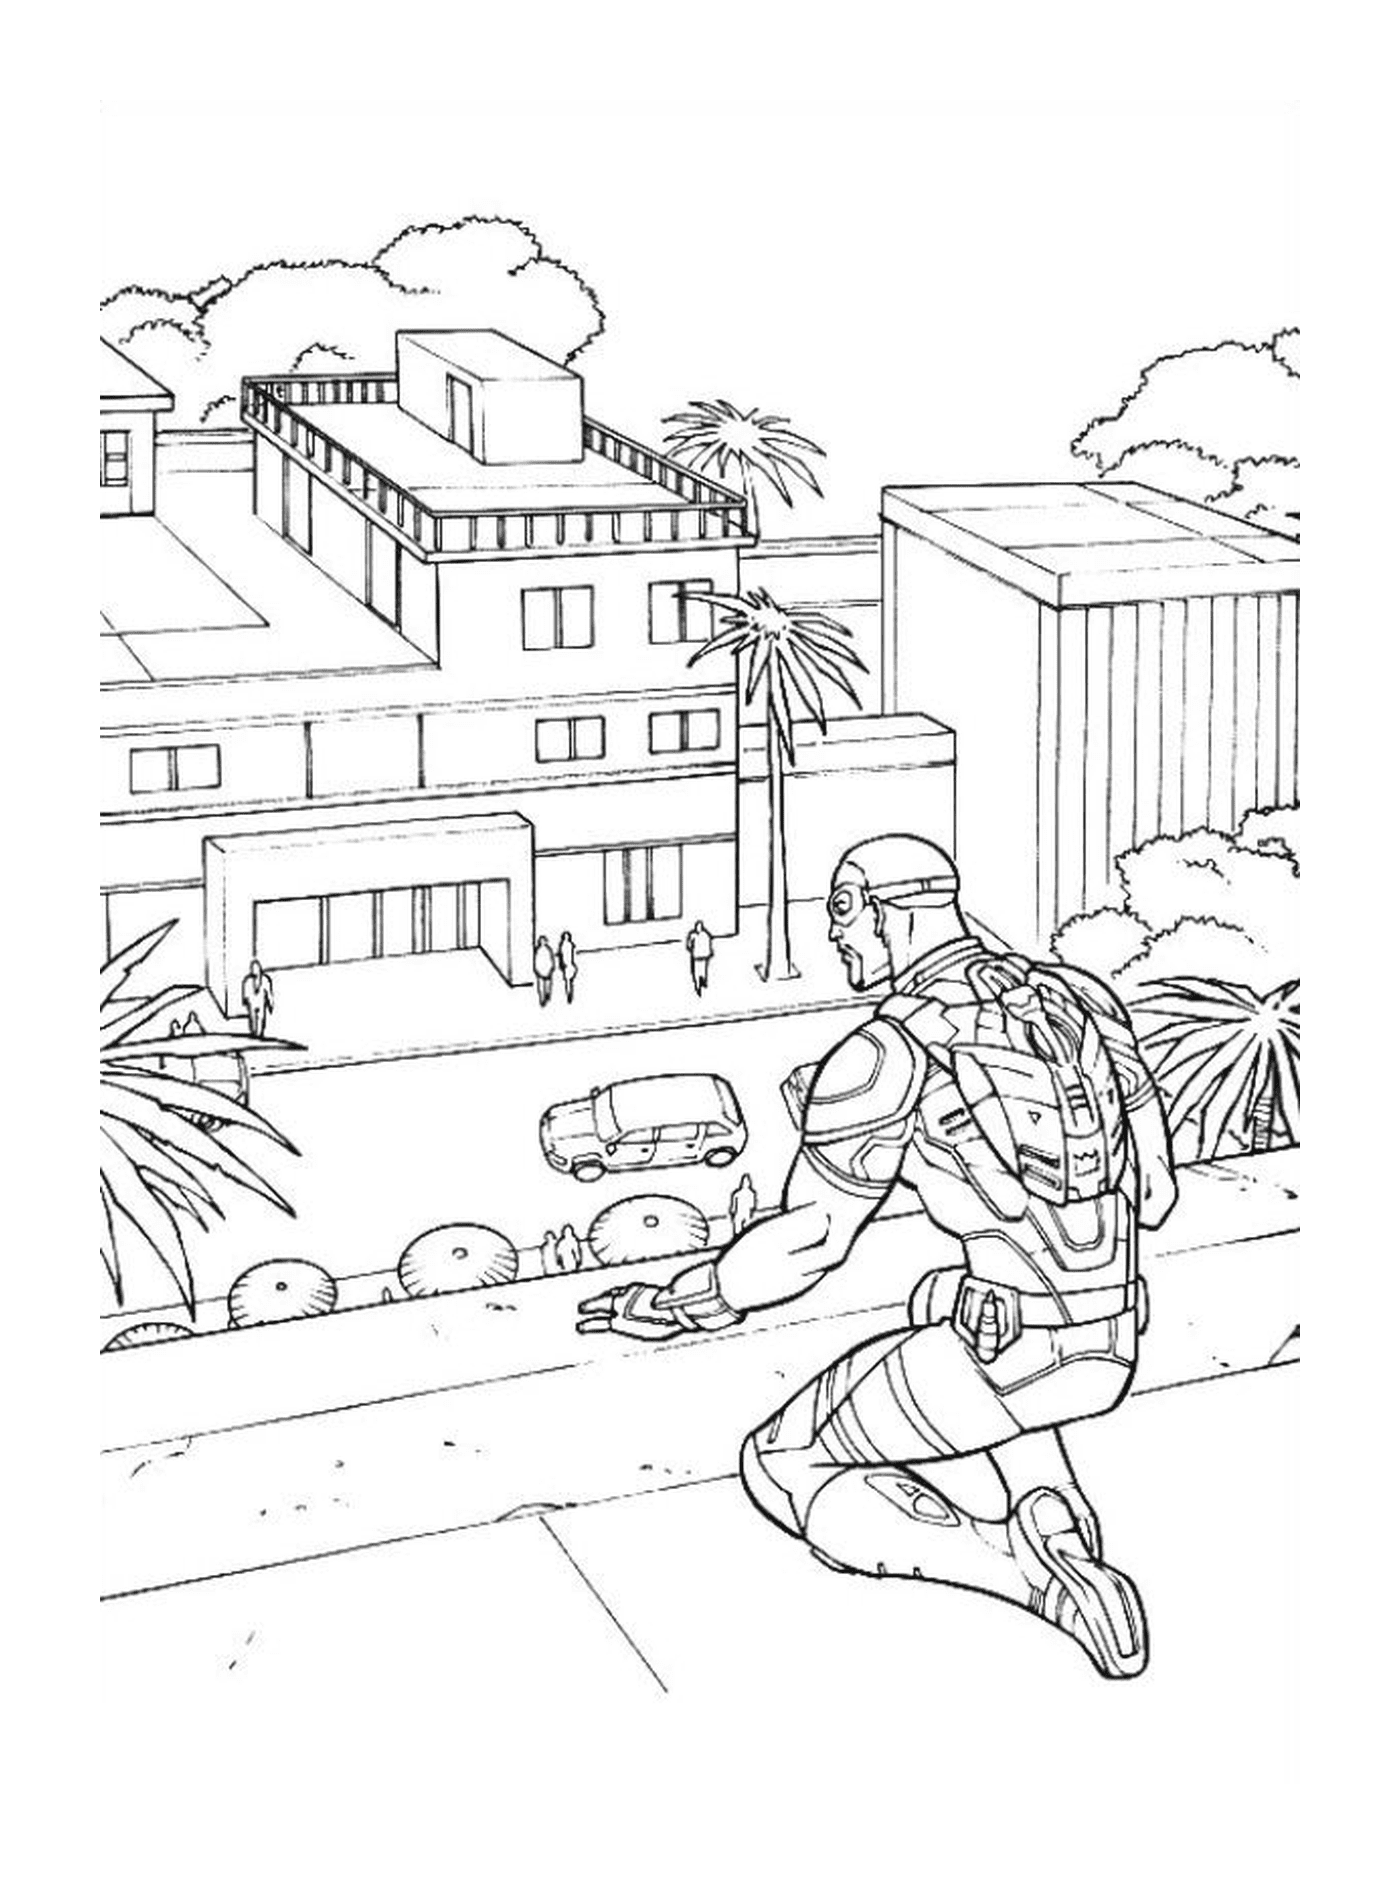  a man on a street (image not related to Captain America) 